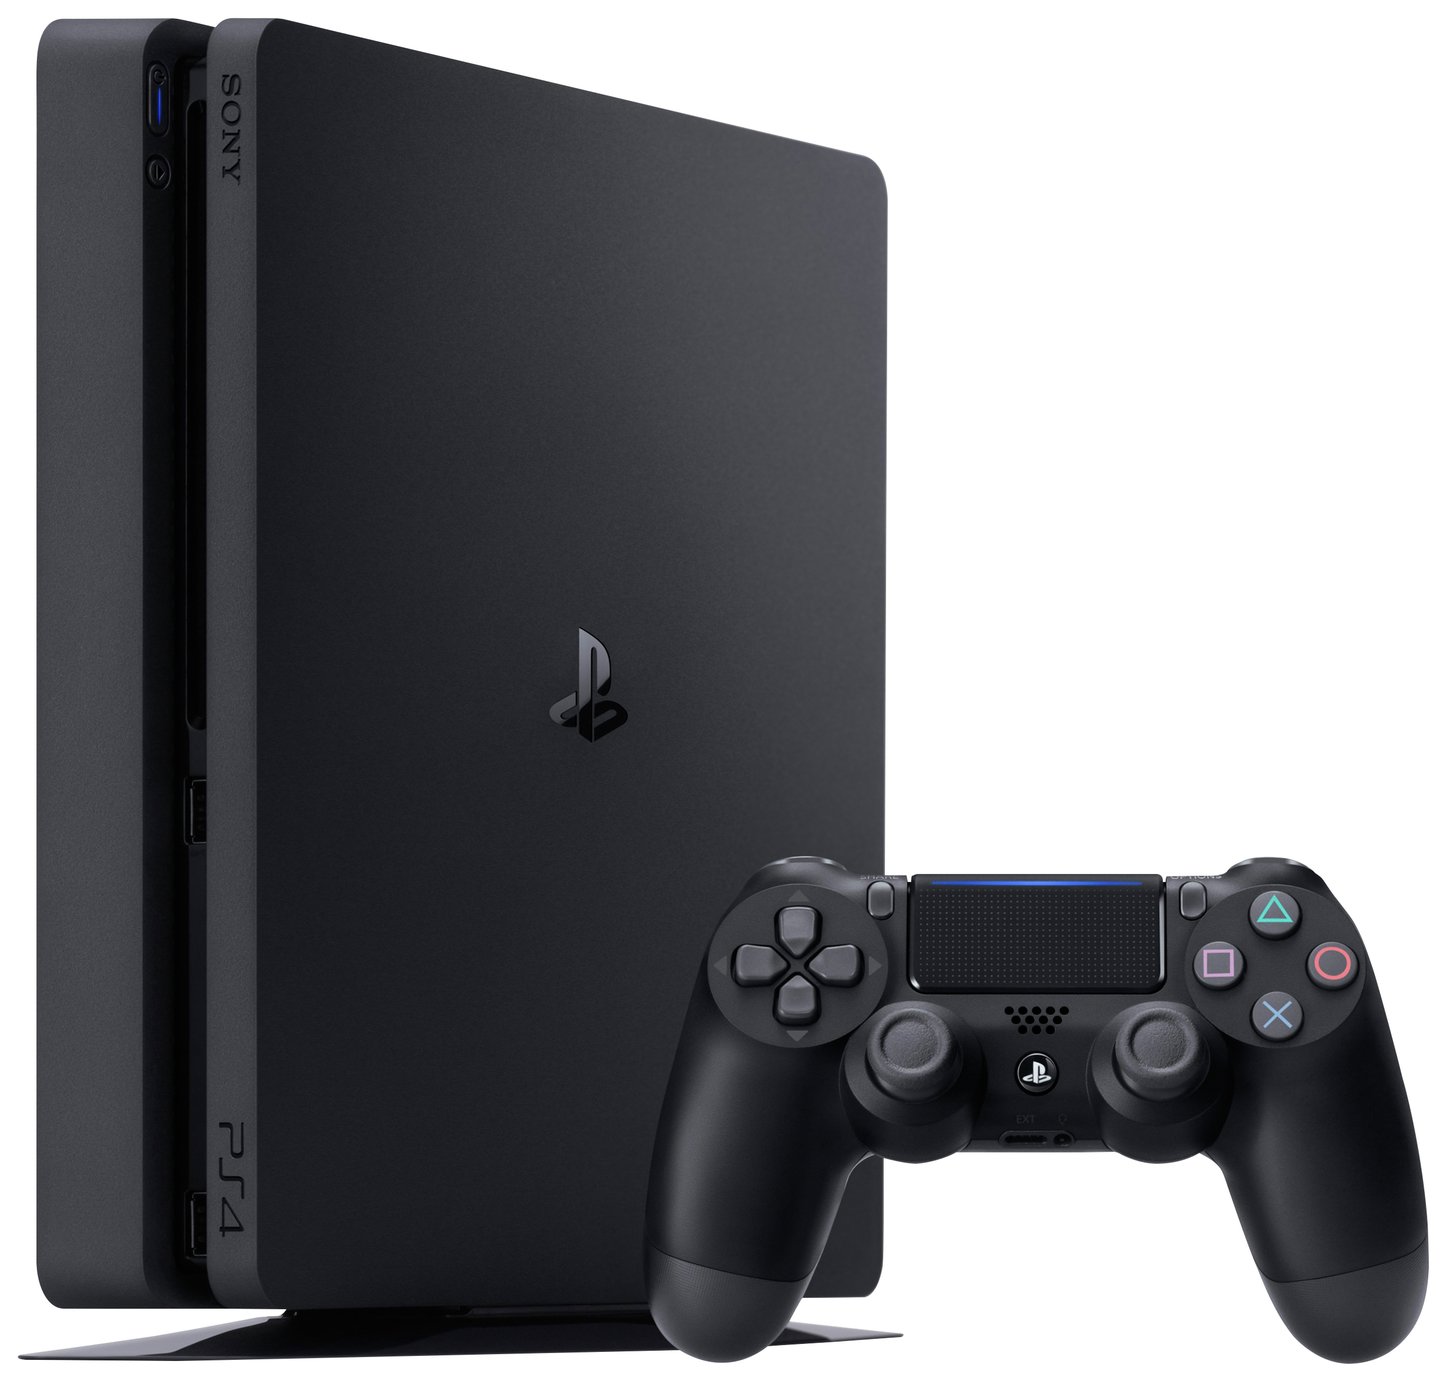 Sony PS4 500GB Console Review